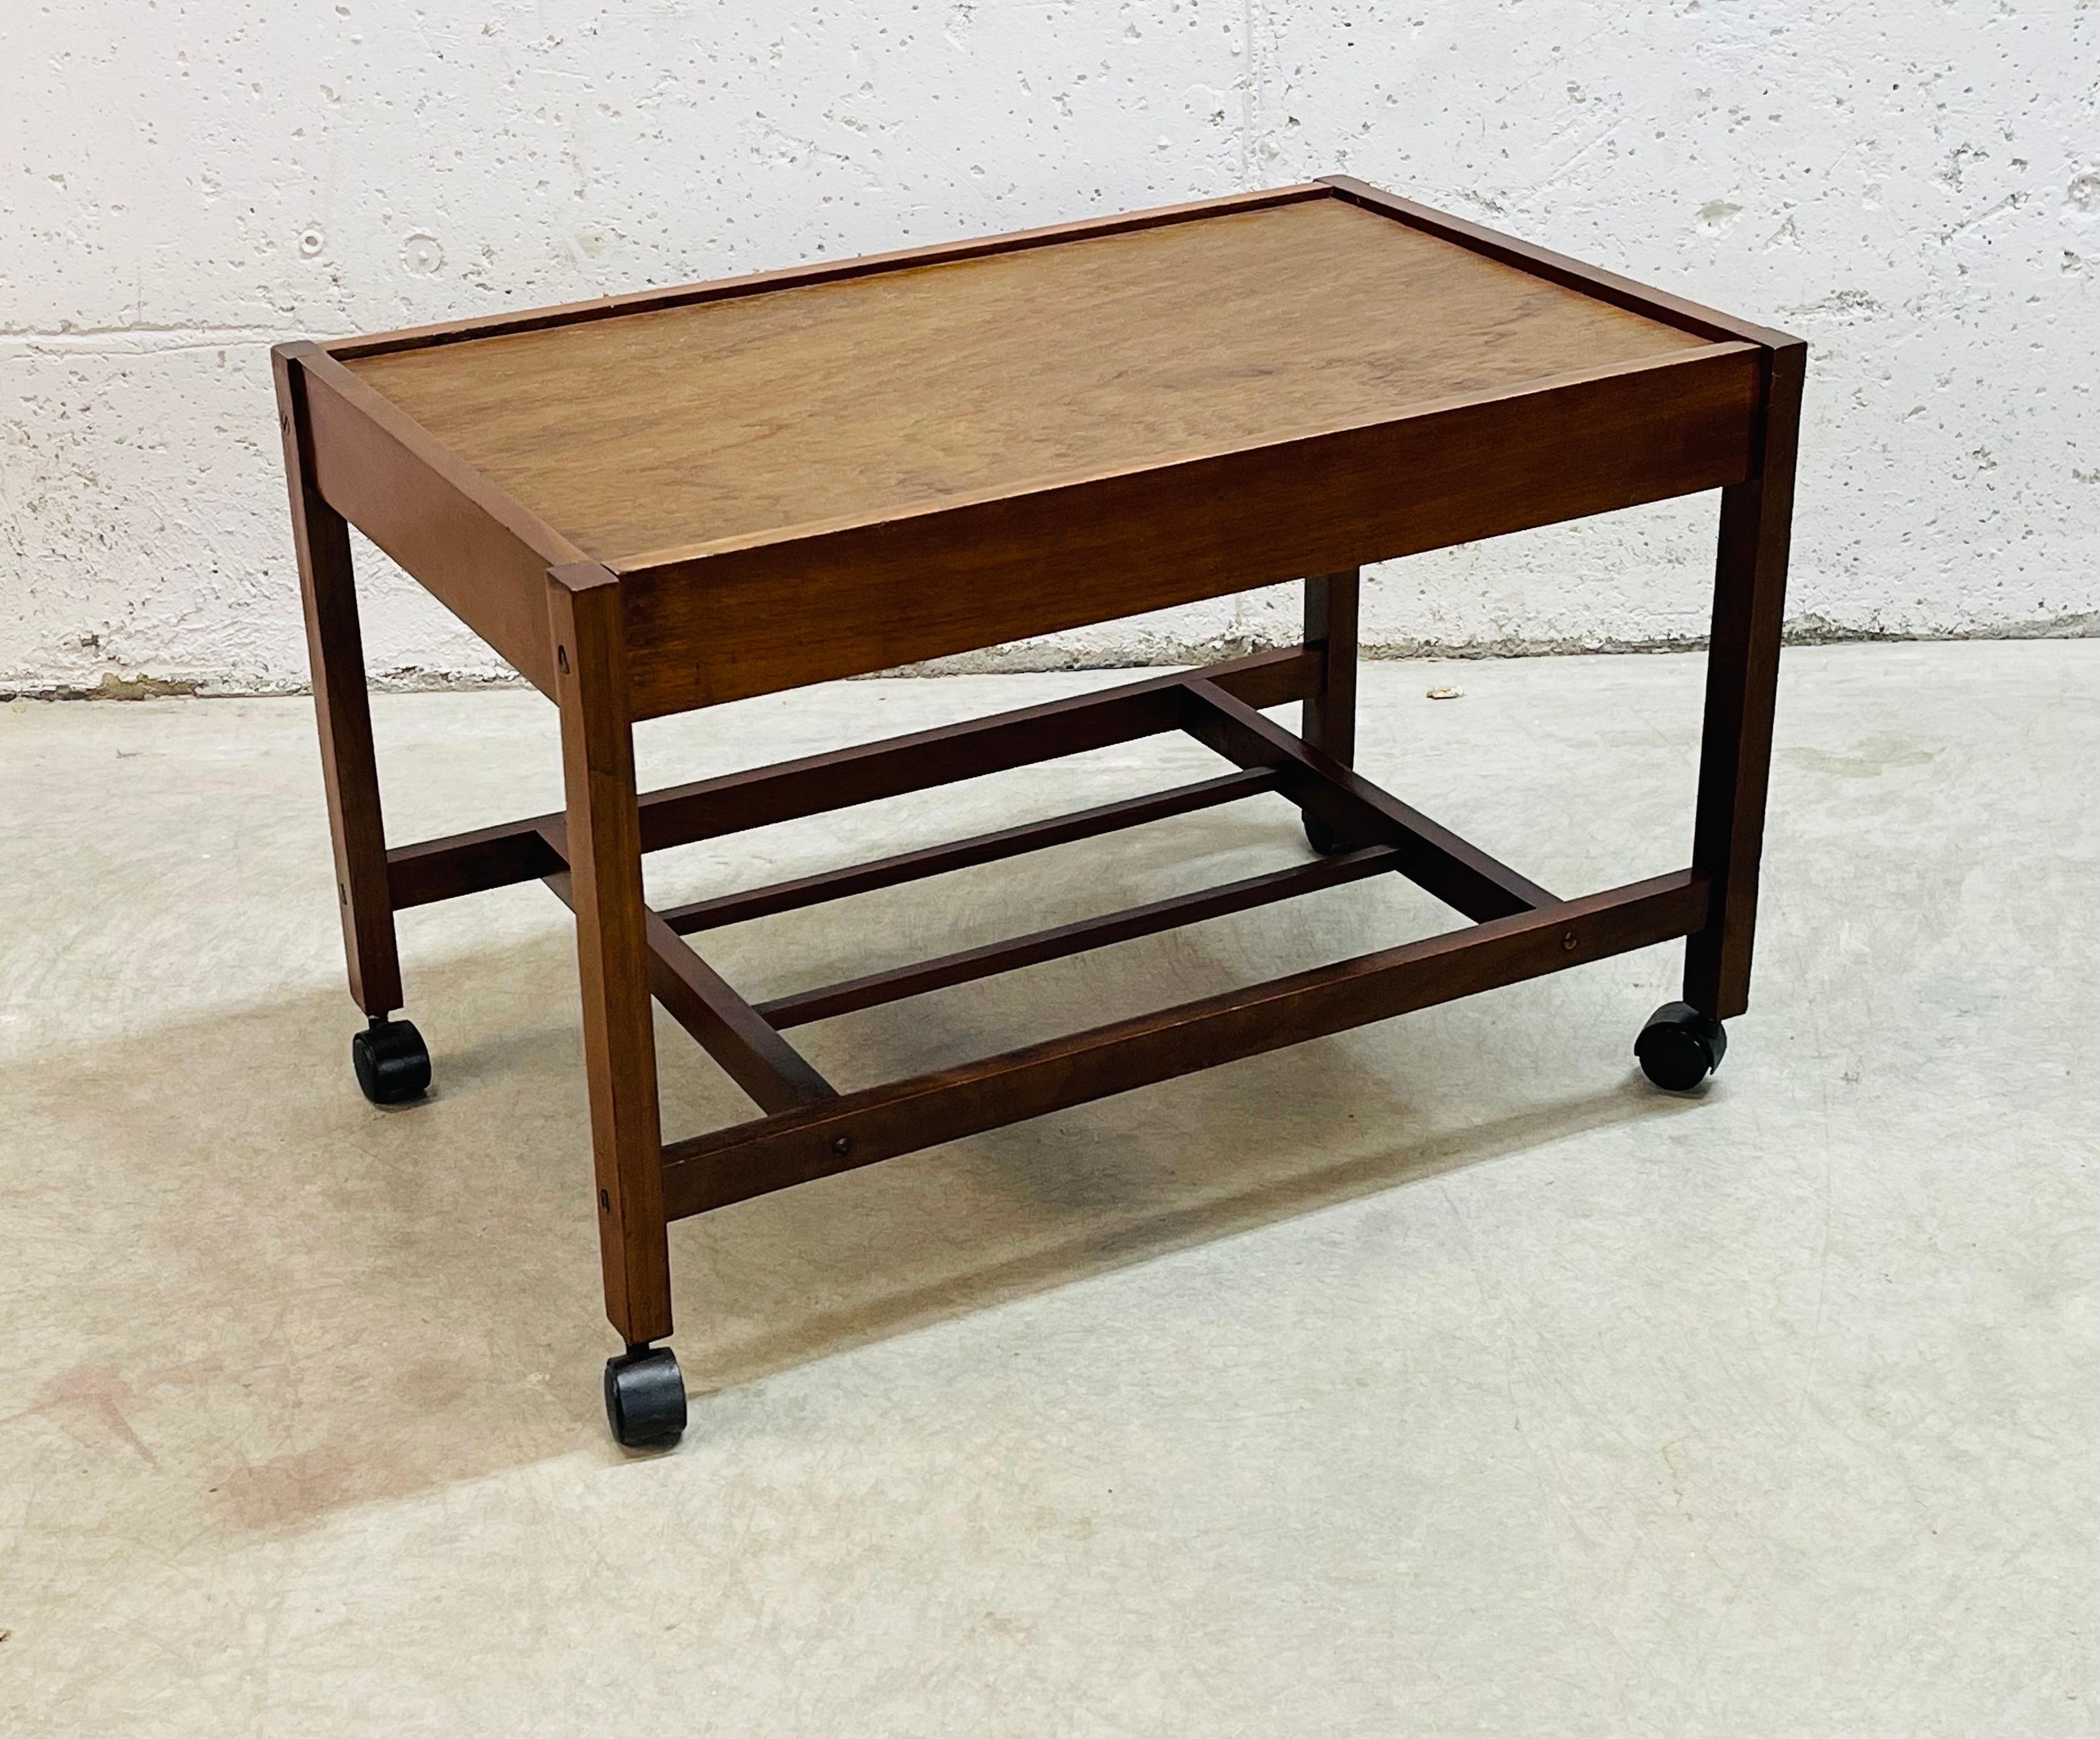 Vintage 1960s wood rolling utility cart with additional shelf for storage. The cart is strong and sturdy with castors that roll freely. Newly refinished condition. No marks.